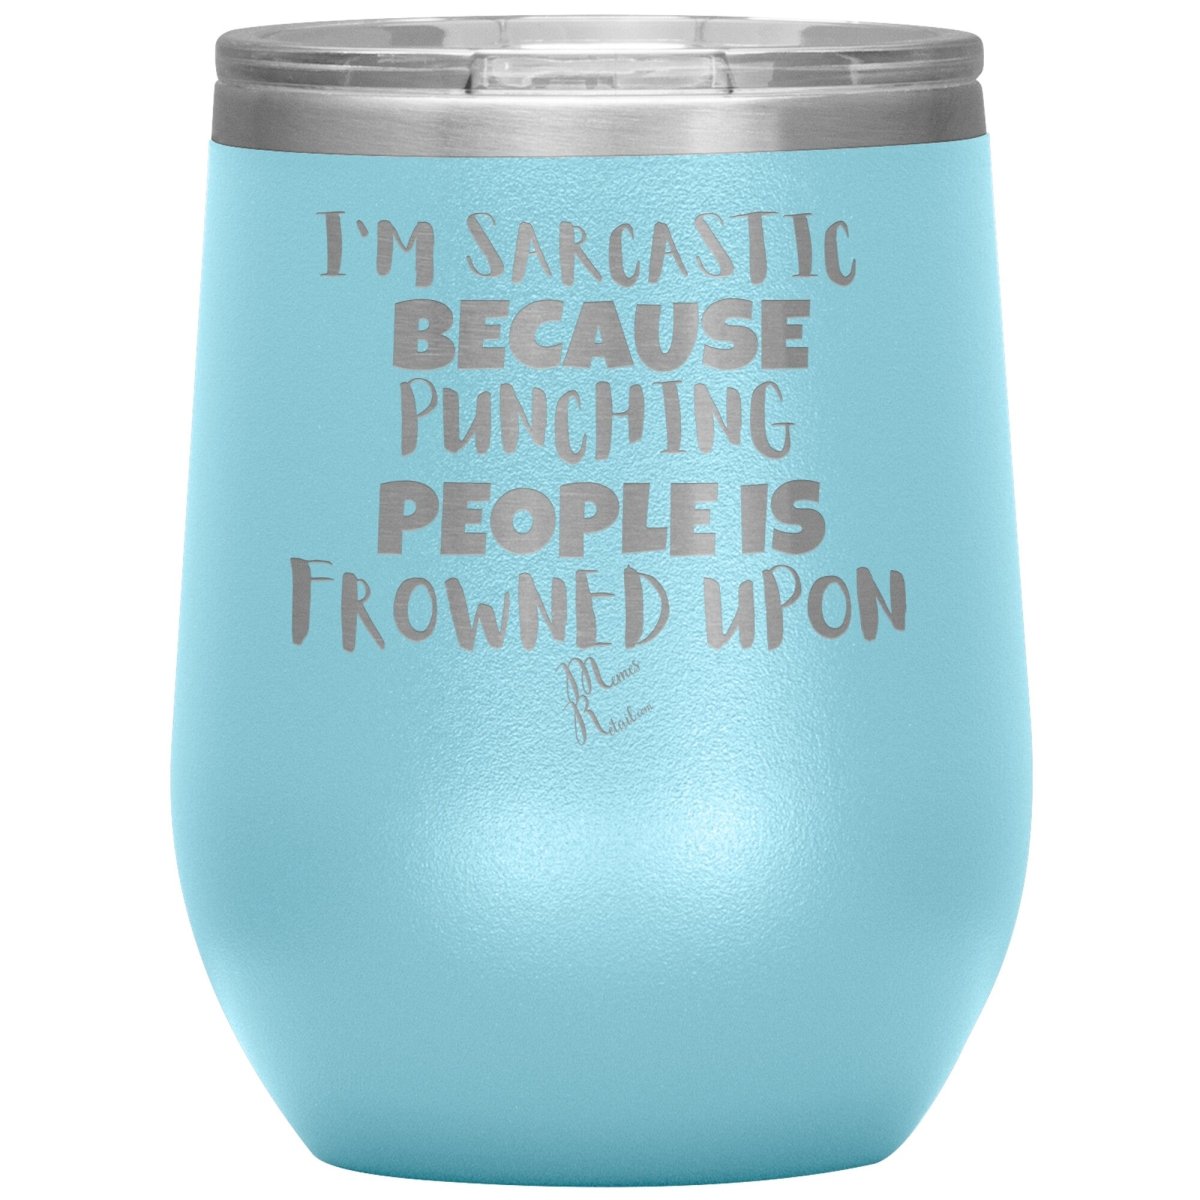 I'm Sarcastic Because Punching People is Frowned Upon Tumblers, 12oz Wine Insulated Tumbler / Light Blue - MemesRetail.com